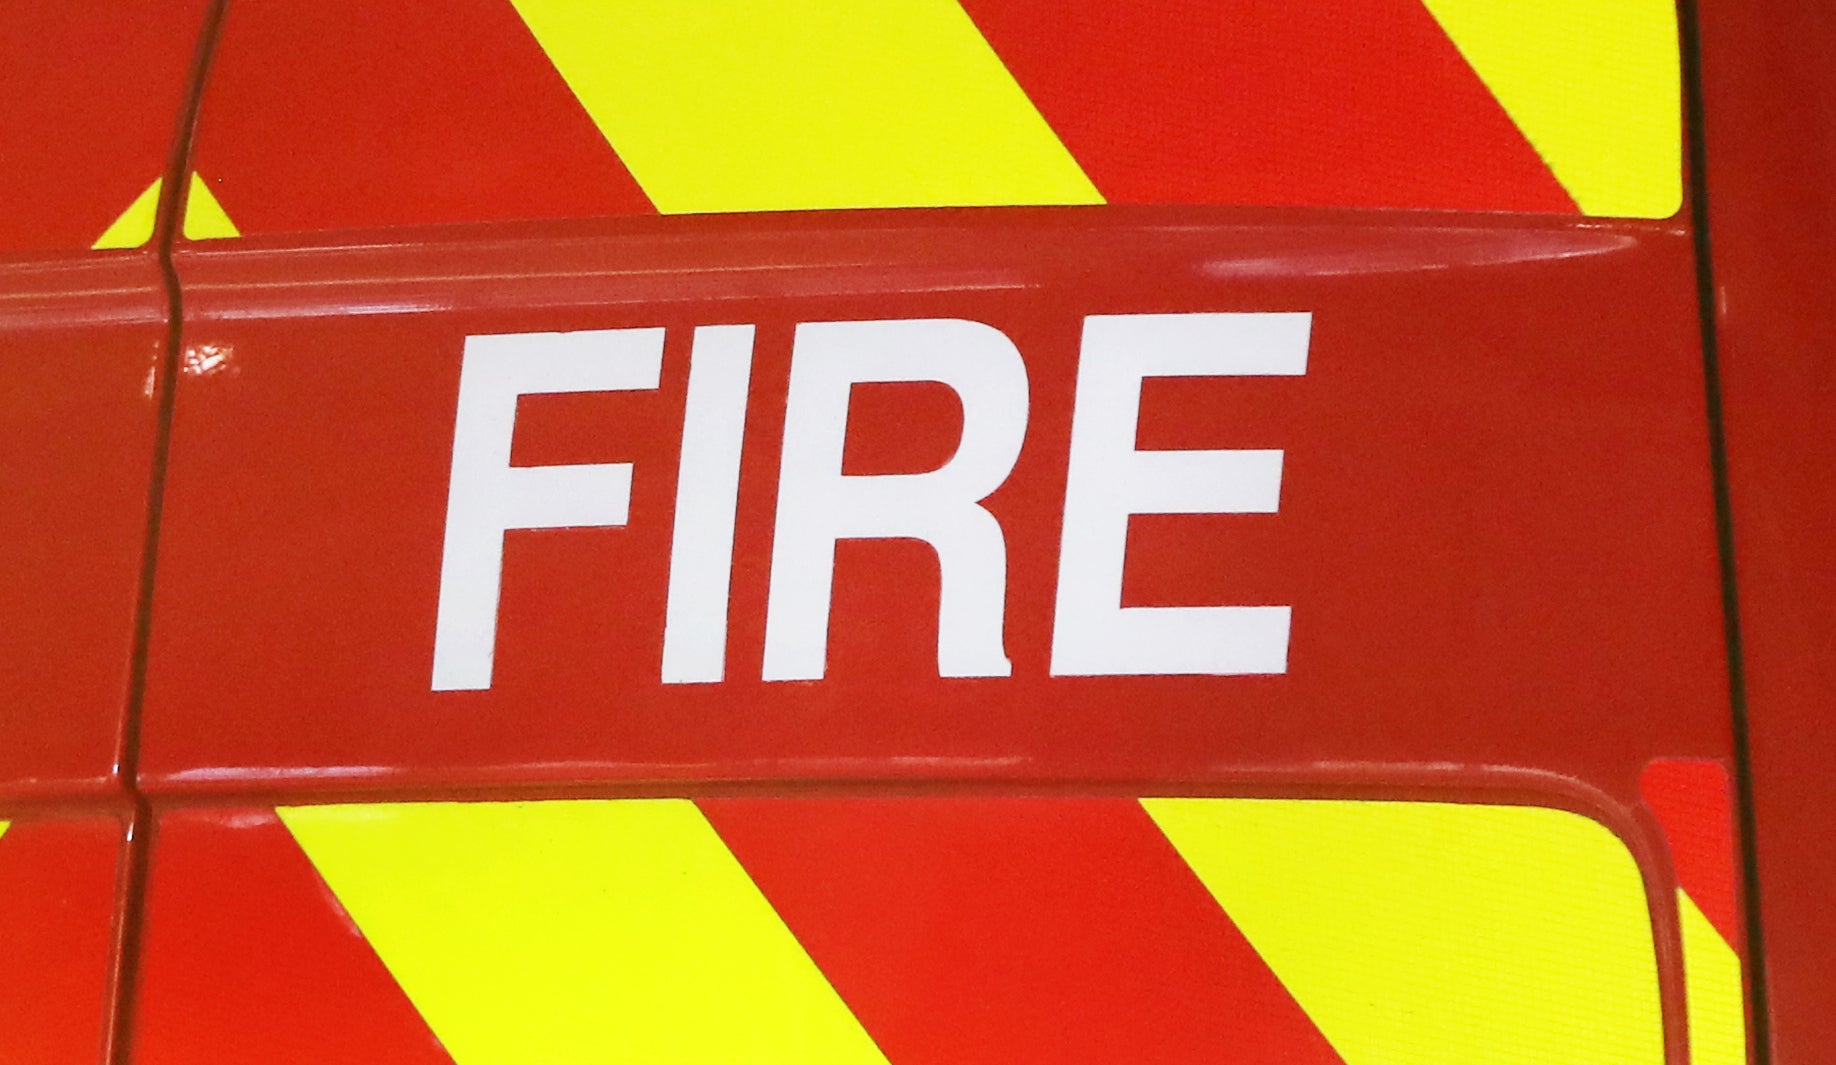 A man has died following a fire at a tower block in Bristol